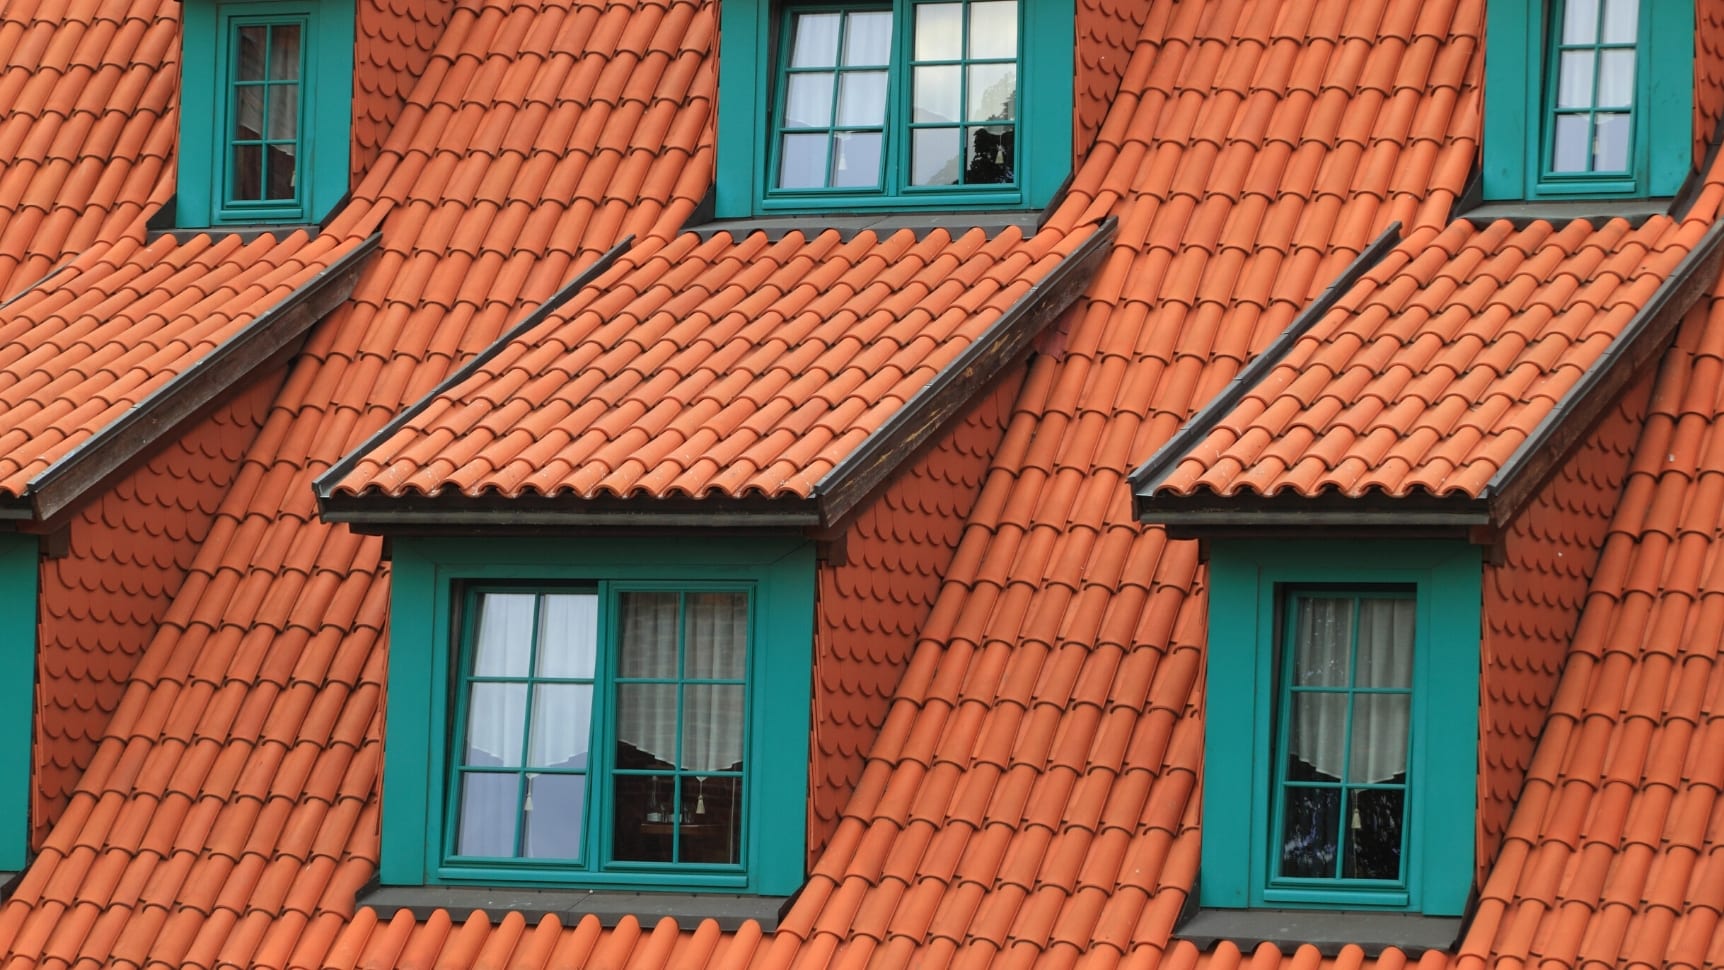 Our Ultimate List: 101 Roofing Blog Post Ideas